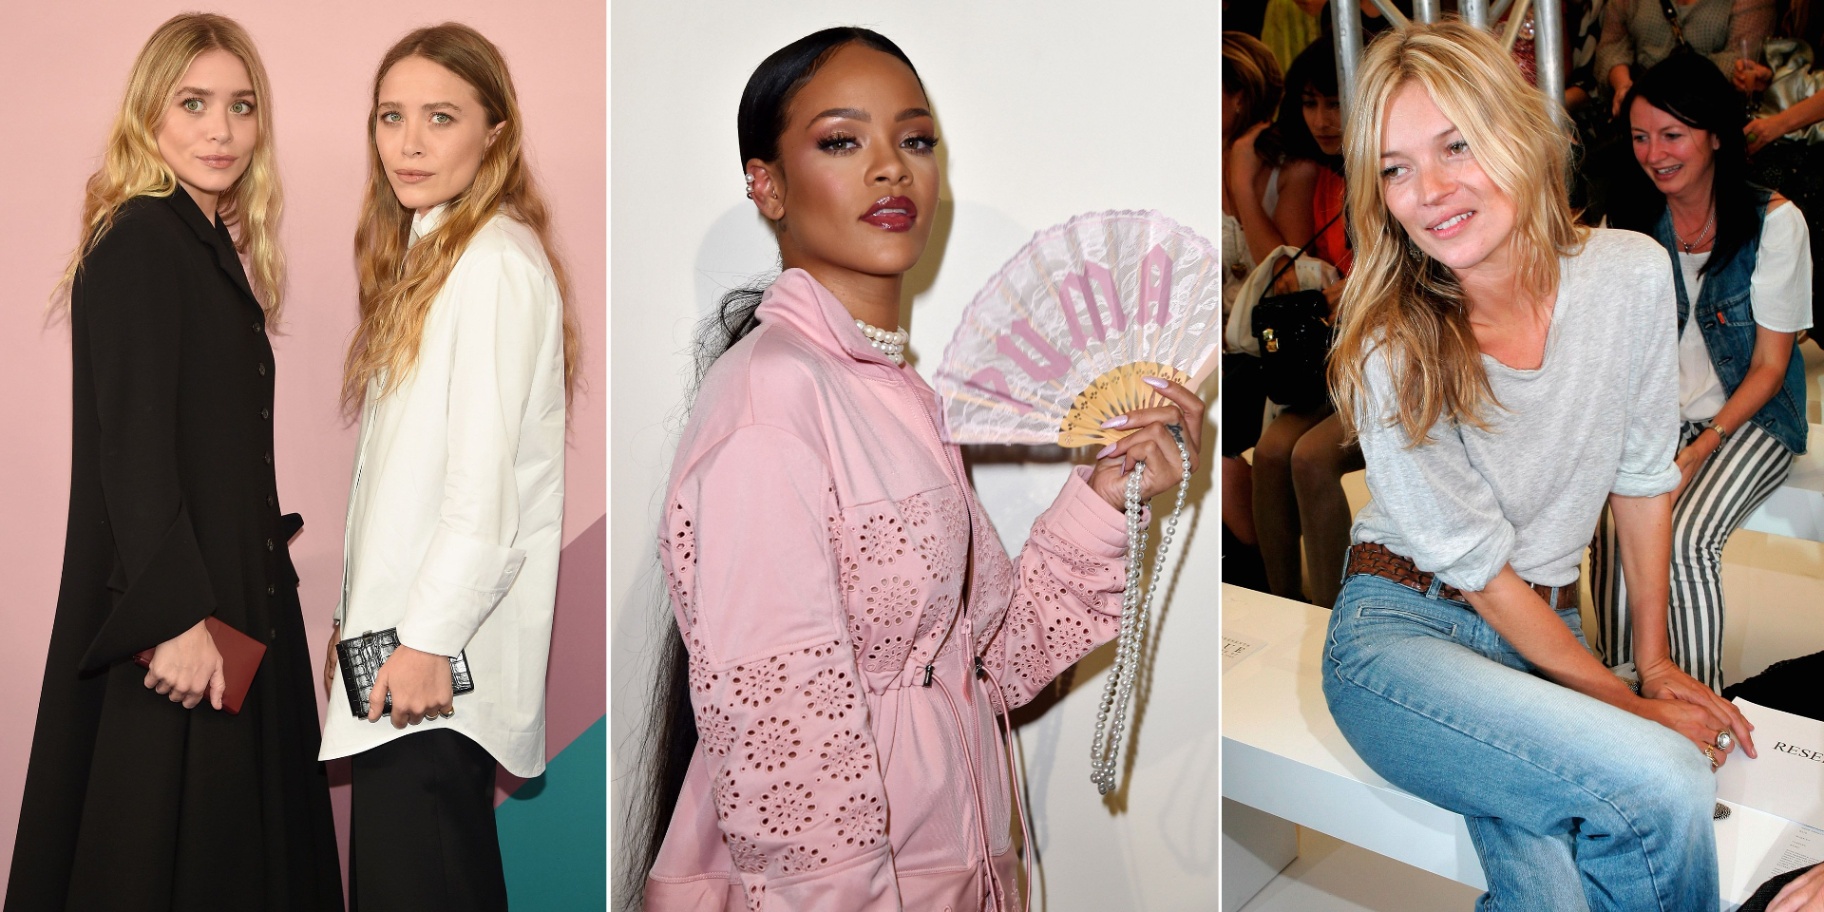 Here's Some of the Best Celebrity-Owned Clothing Lines to Buy From